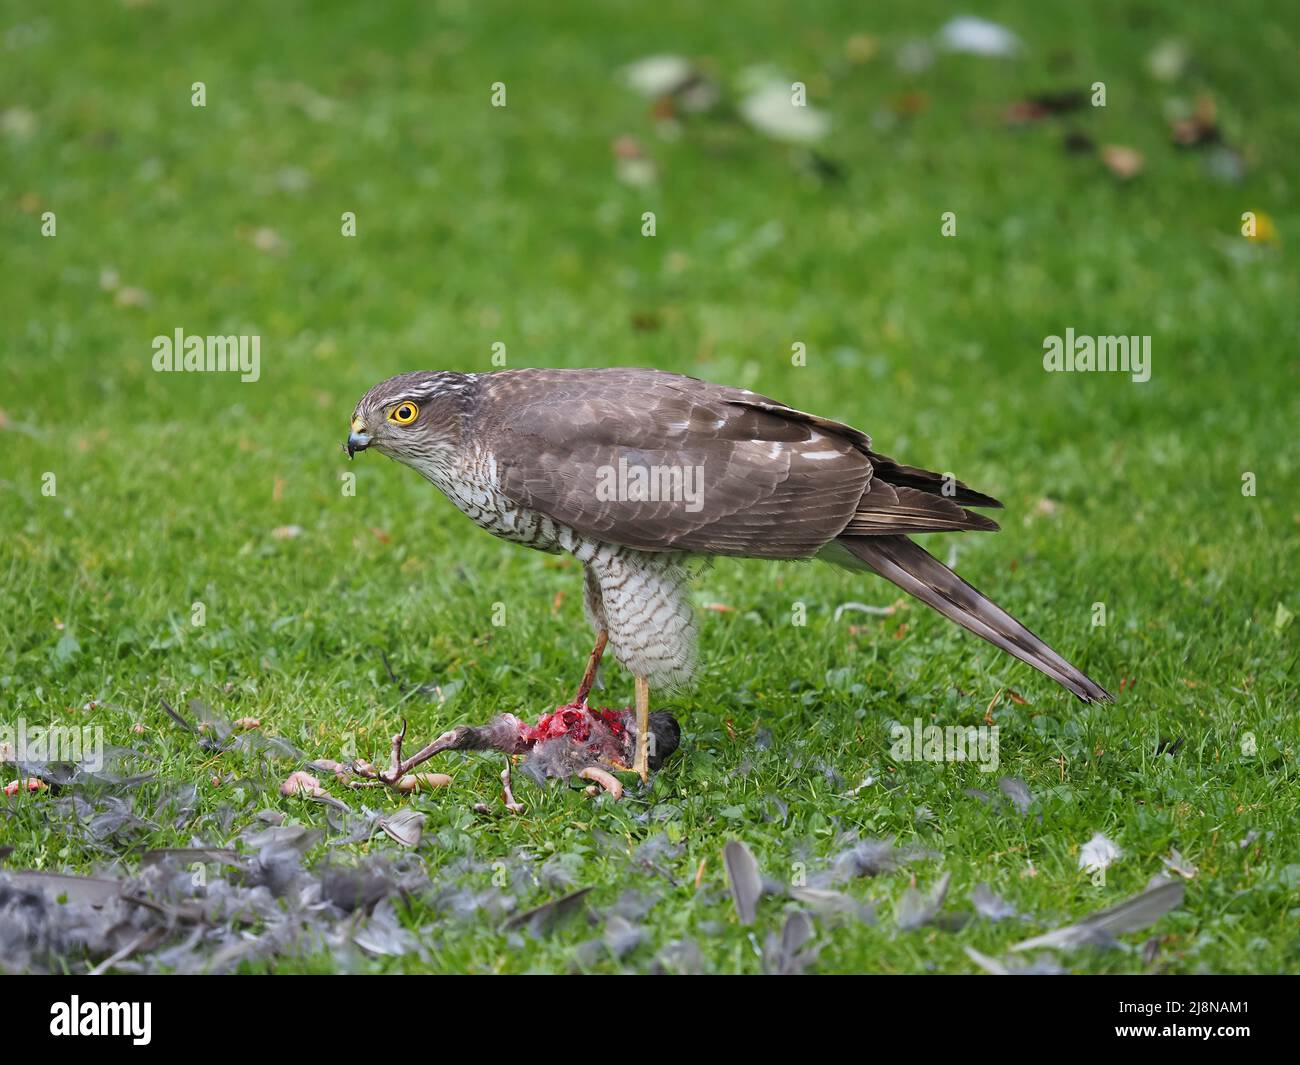 Sparrowhawk on a kill in my garden where it plucked the prey and consumed much of it before flying off with the remains. Stock Photo